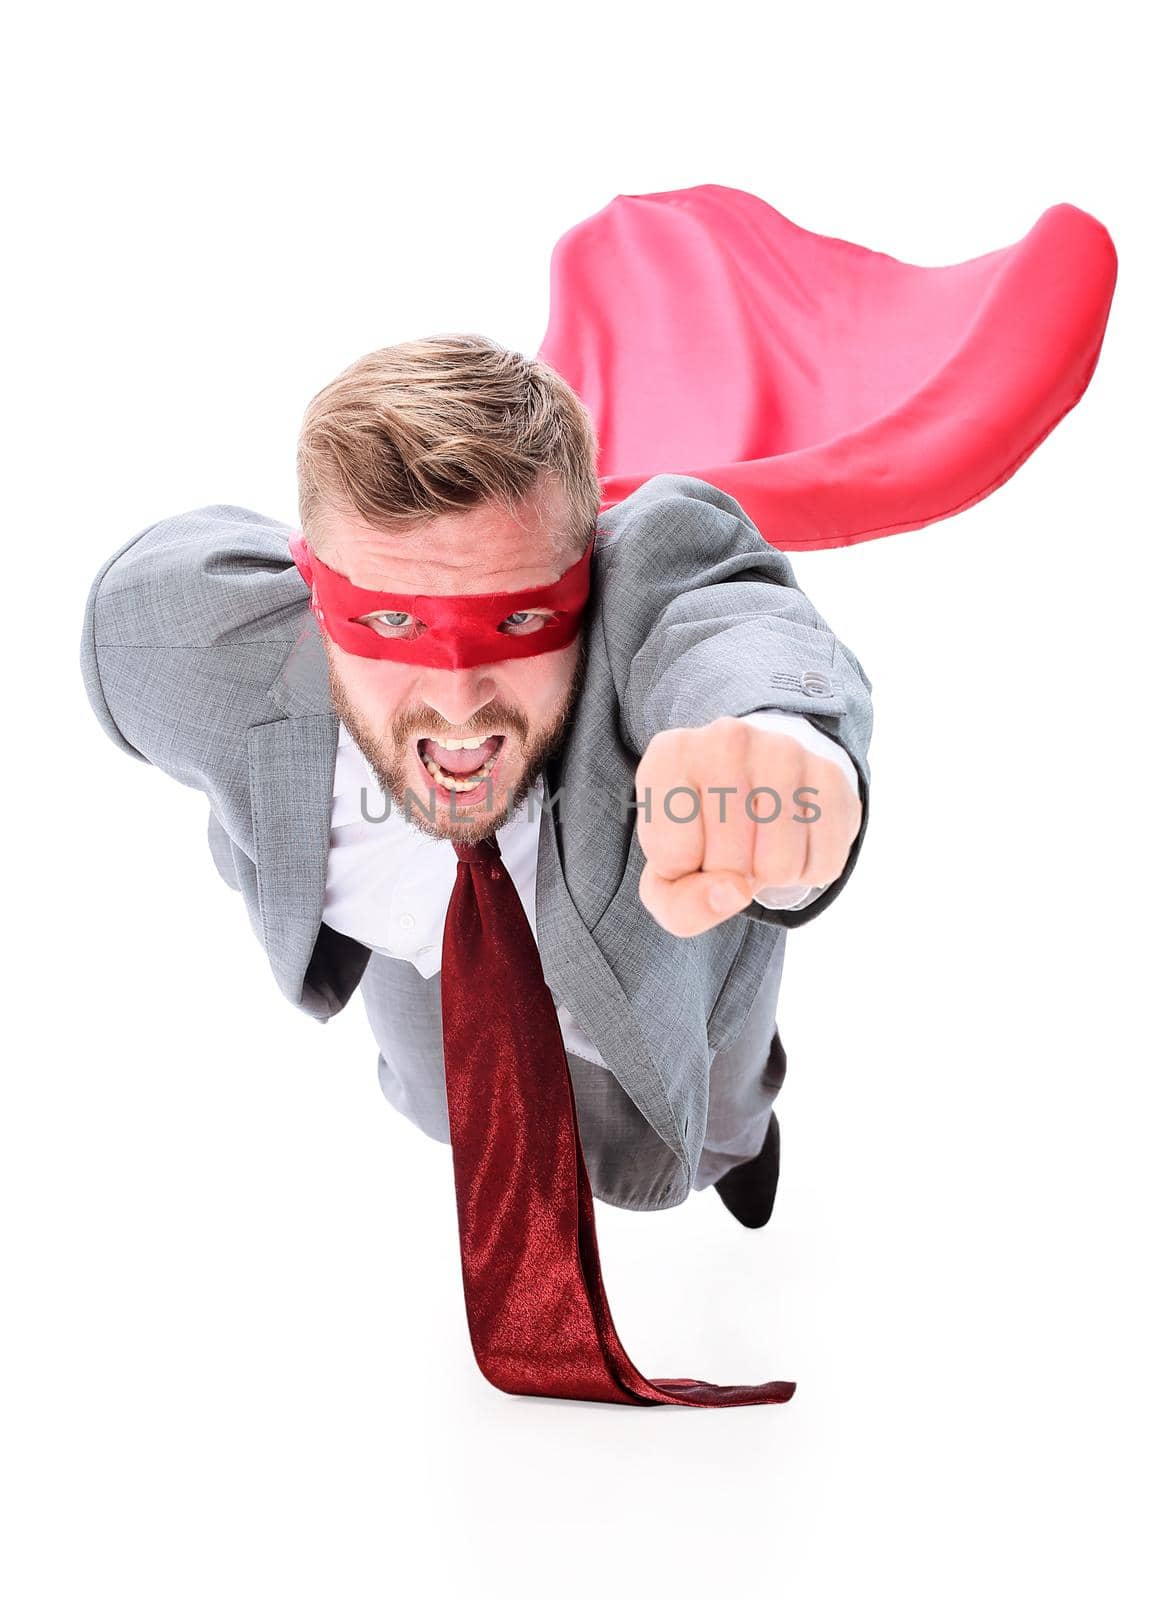 flying superhero businessman looking at the camera. isolated on white background